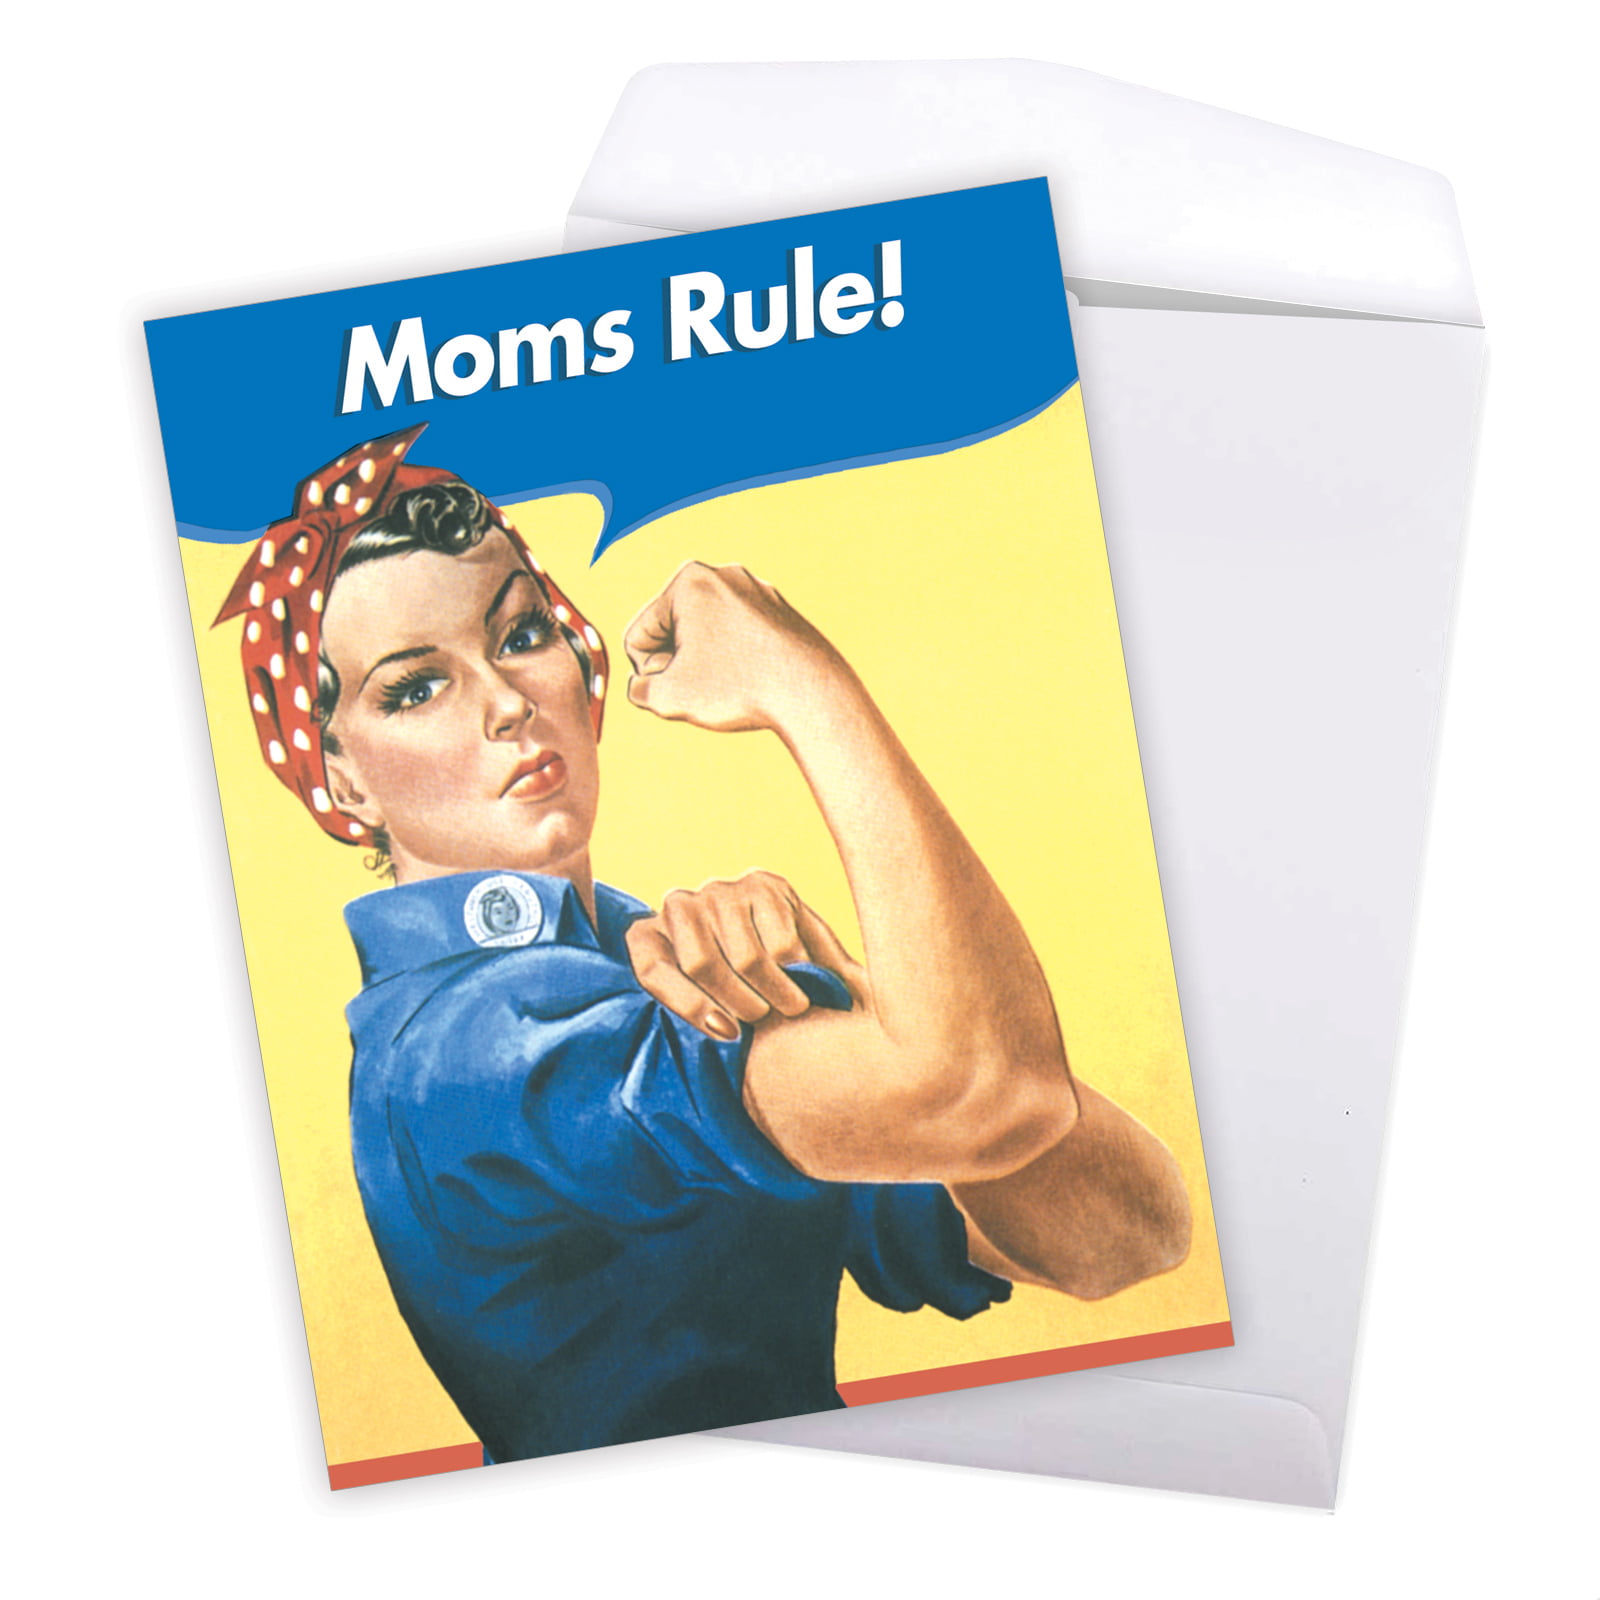 Details about   MOTHER'S DAY Mom Car School Carpooling Mall Sun HUMOROUS LARGE Greeting Card 